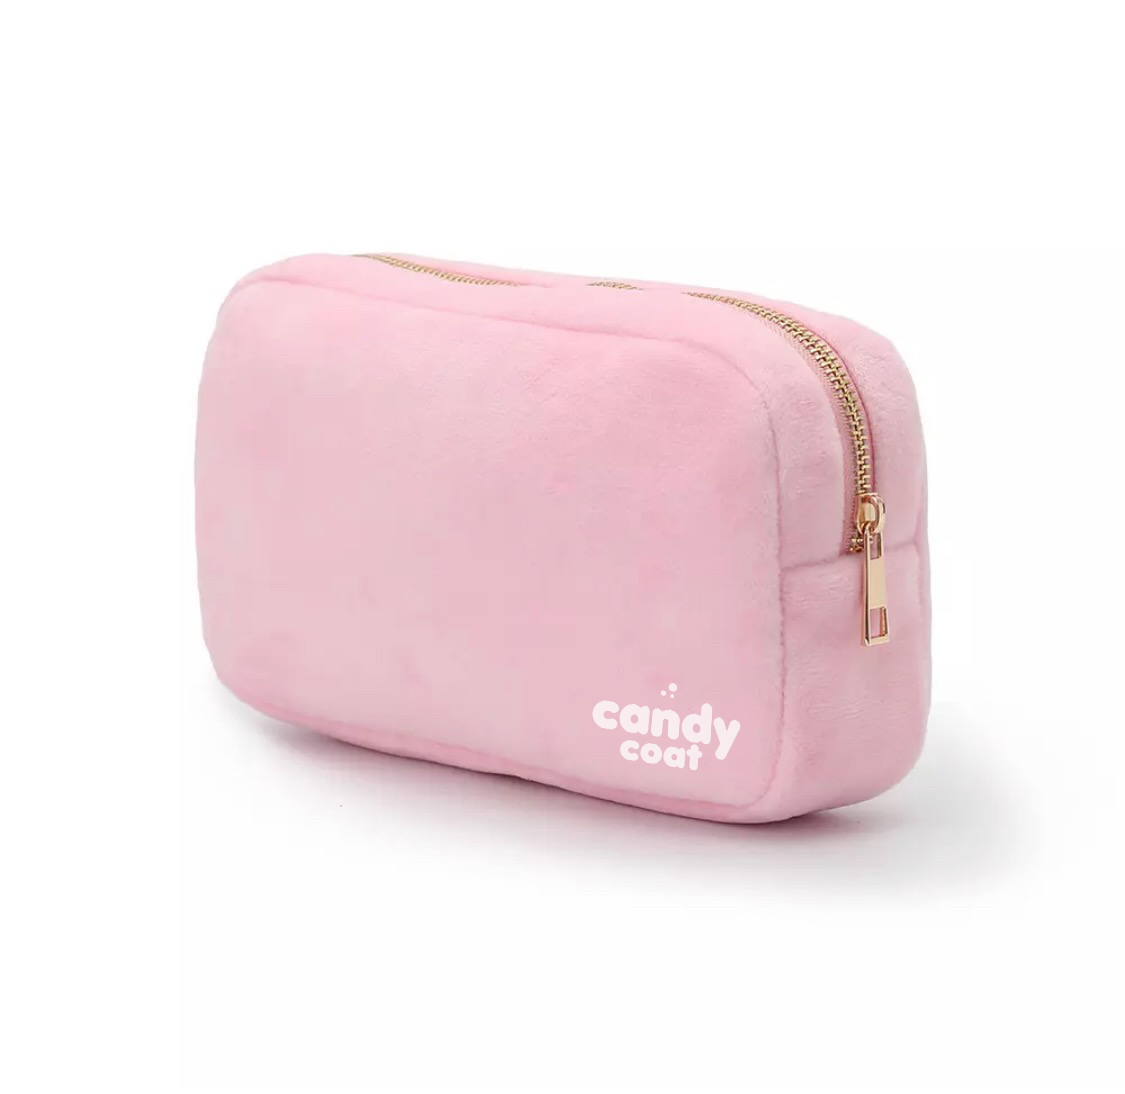 Candy Coat - Candy Pouch - Candy Coat